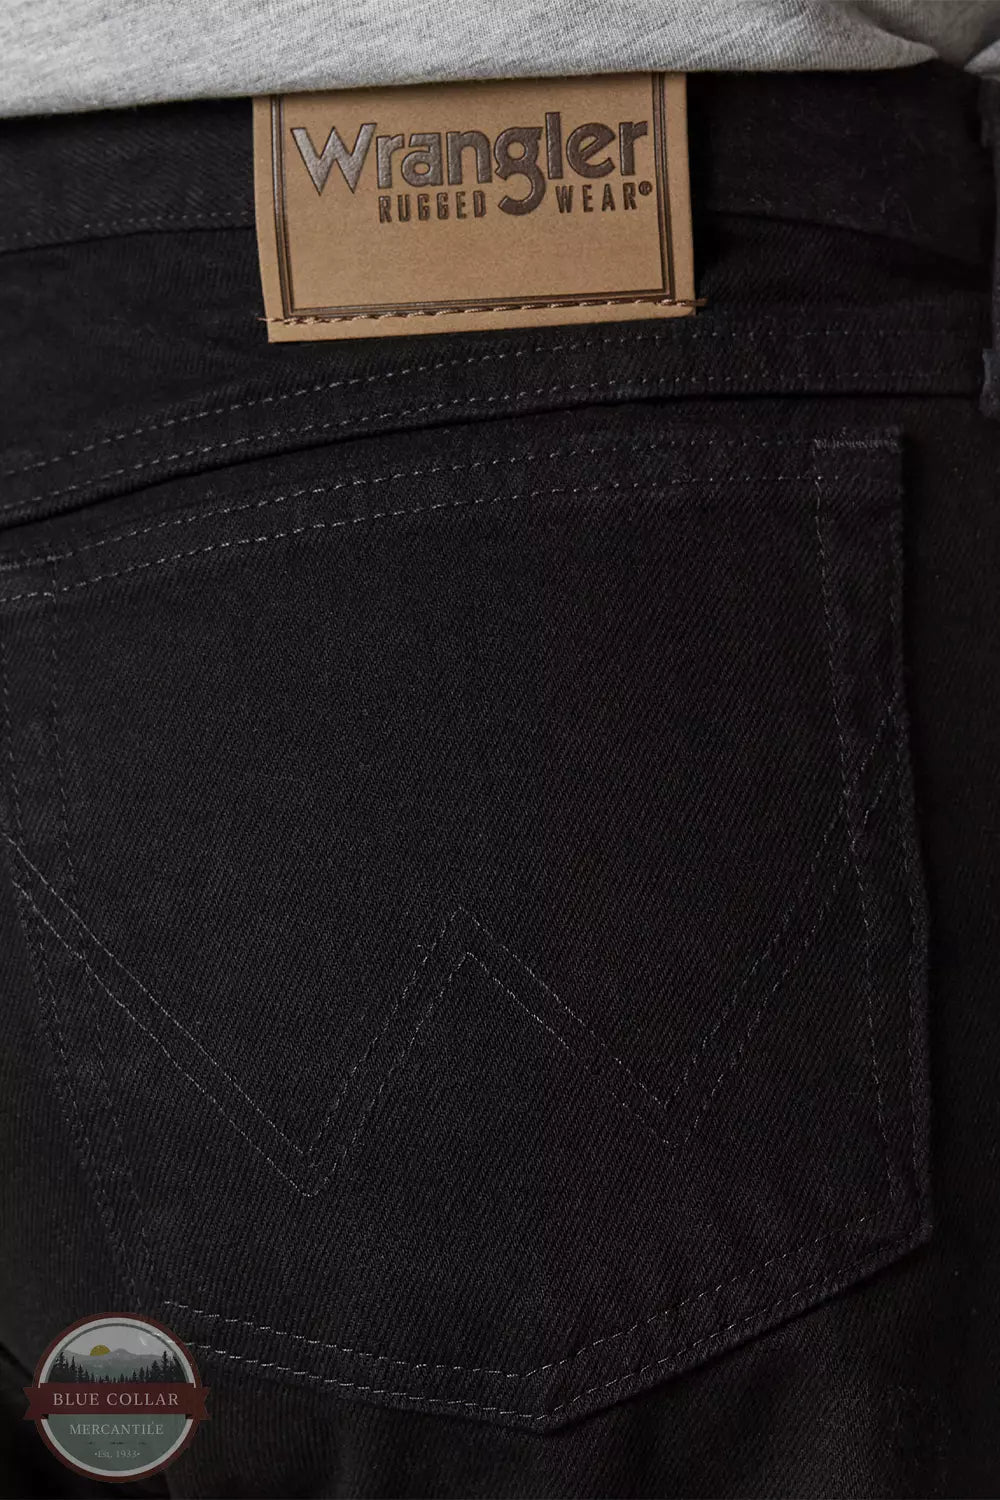 Wrangler 35002OB Rugged Wear Relaxed Fit Jeans in Black Detail View